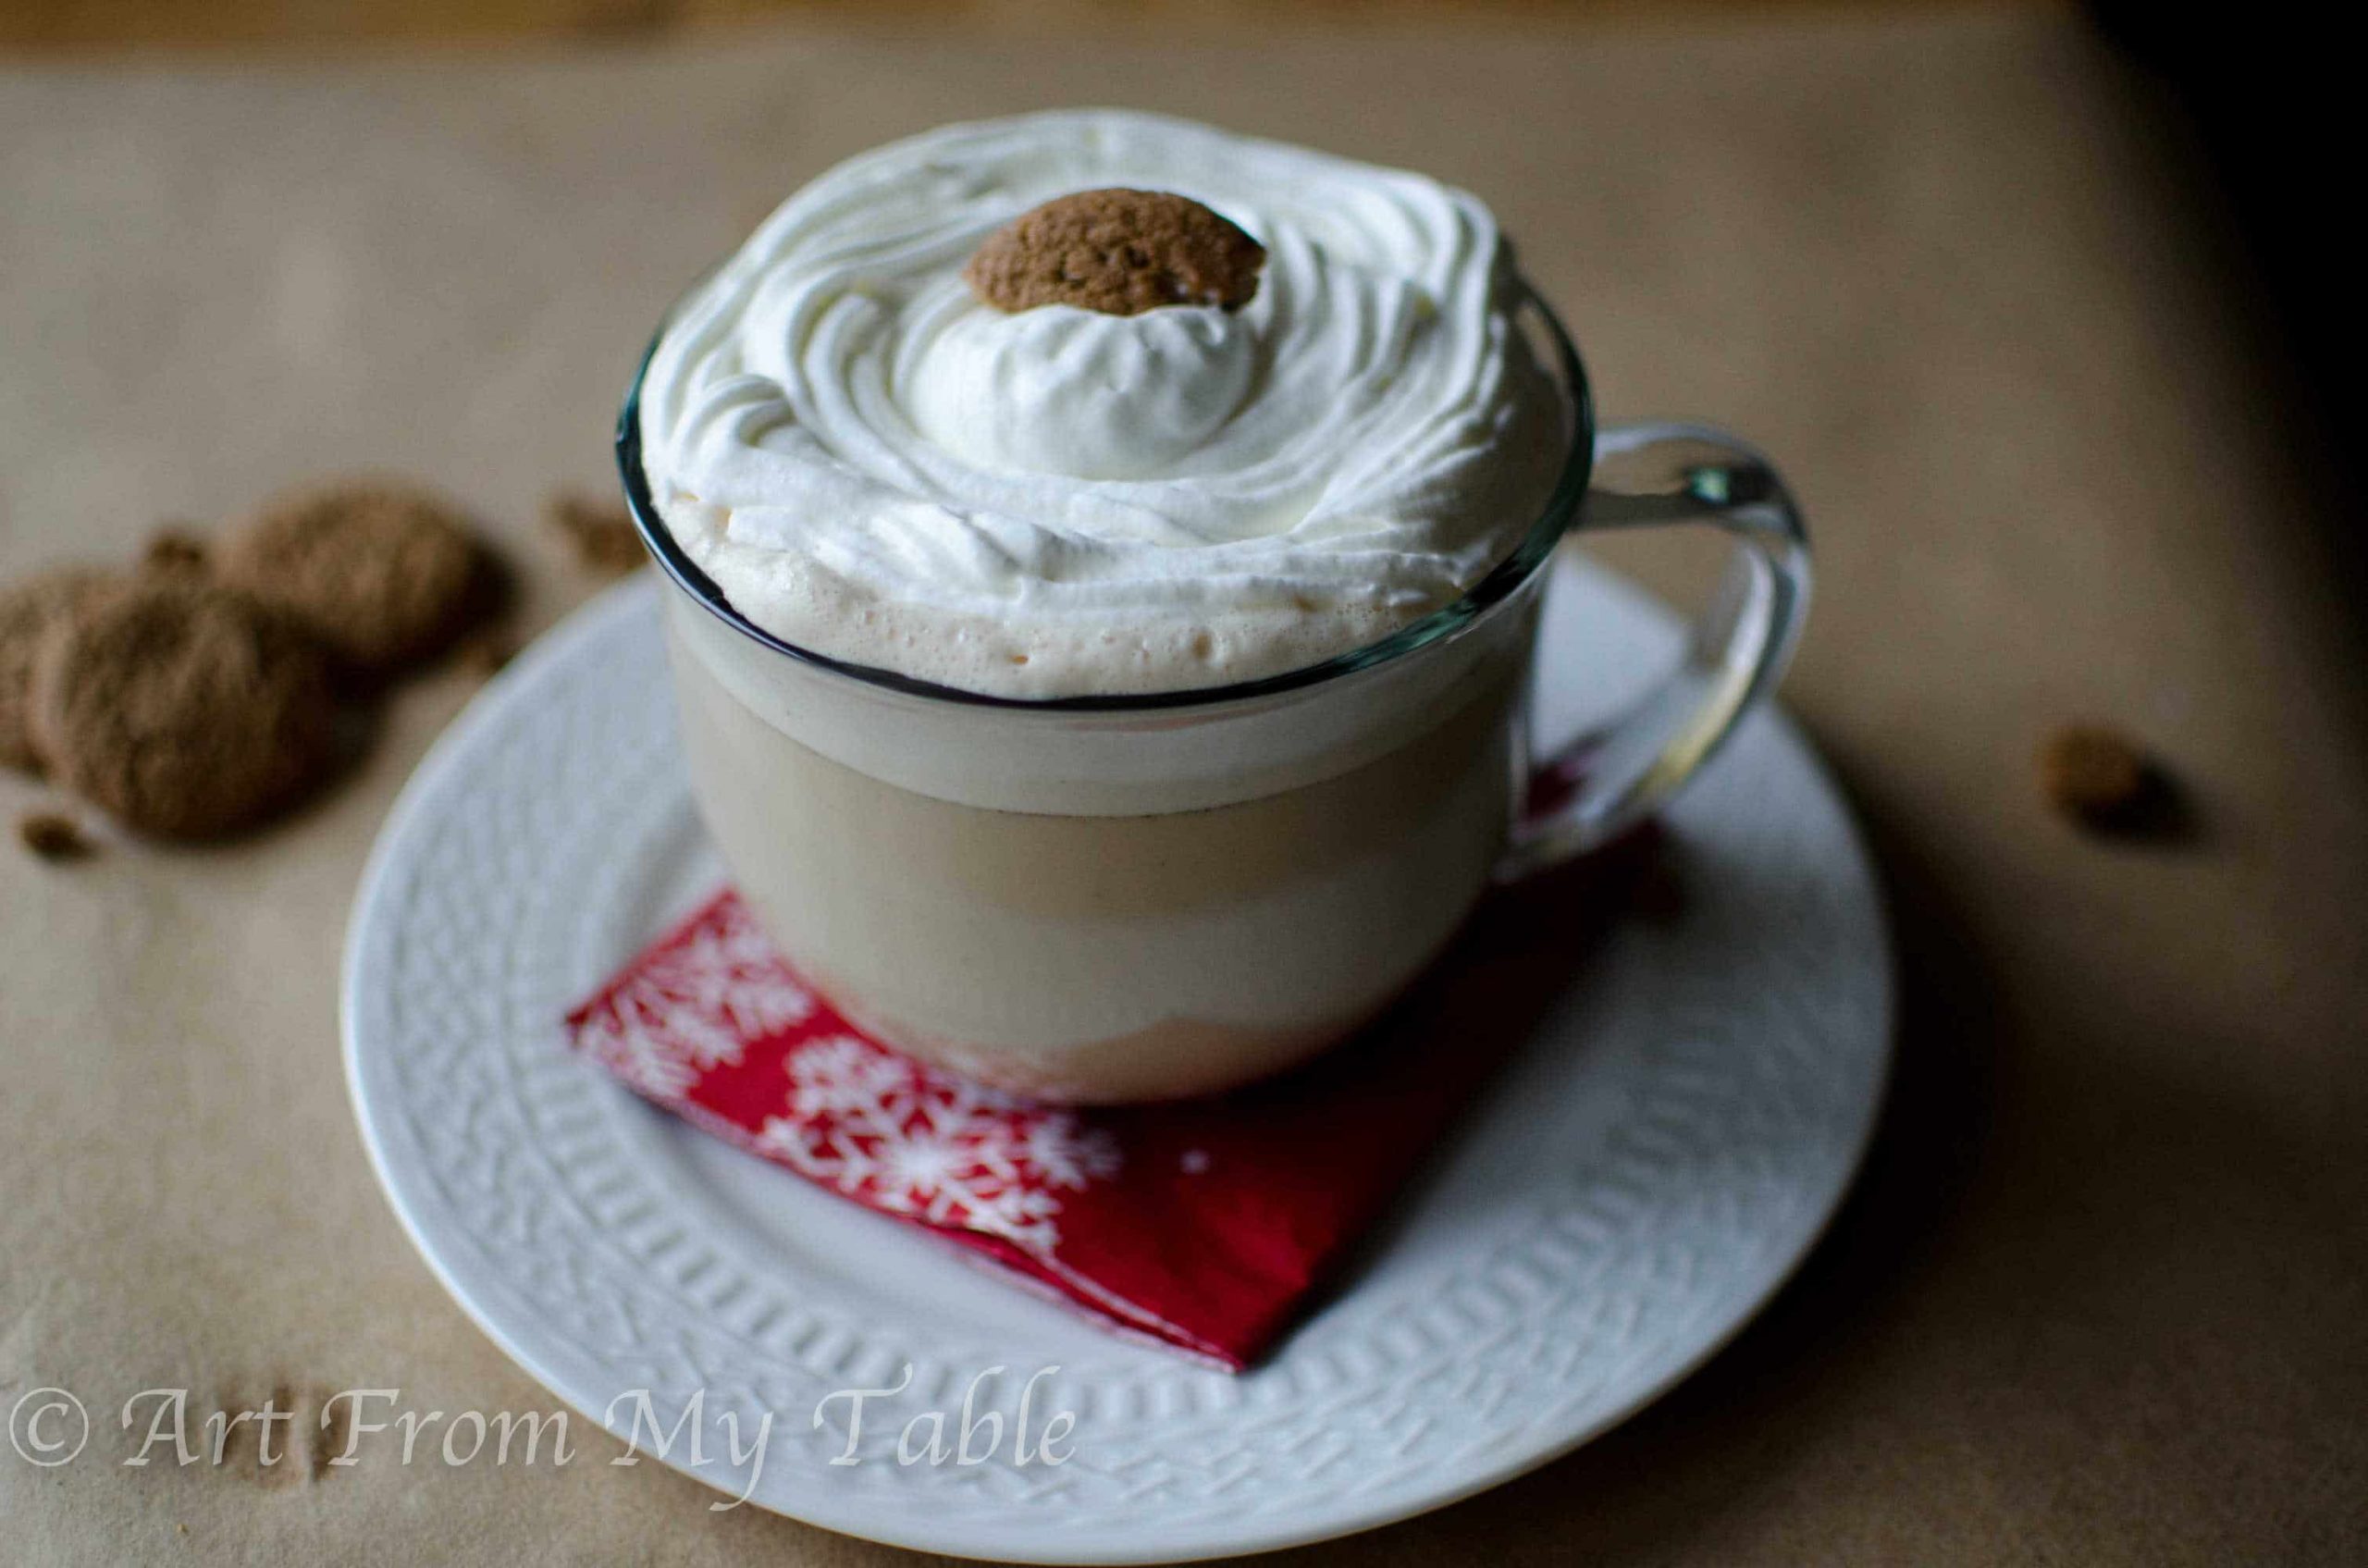 Gingersnap steamer in a glass mug, topped with fresh whipped cream.